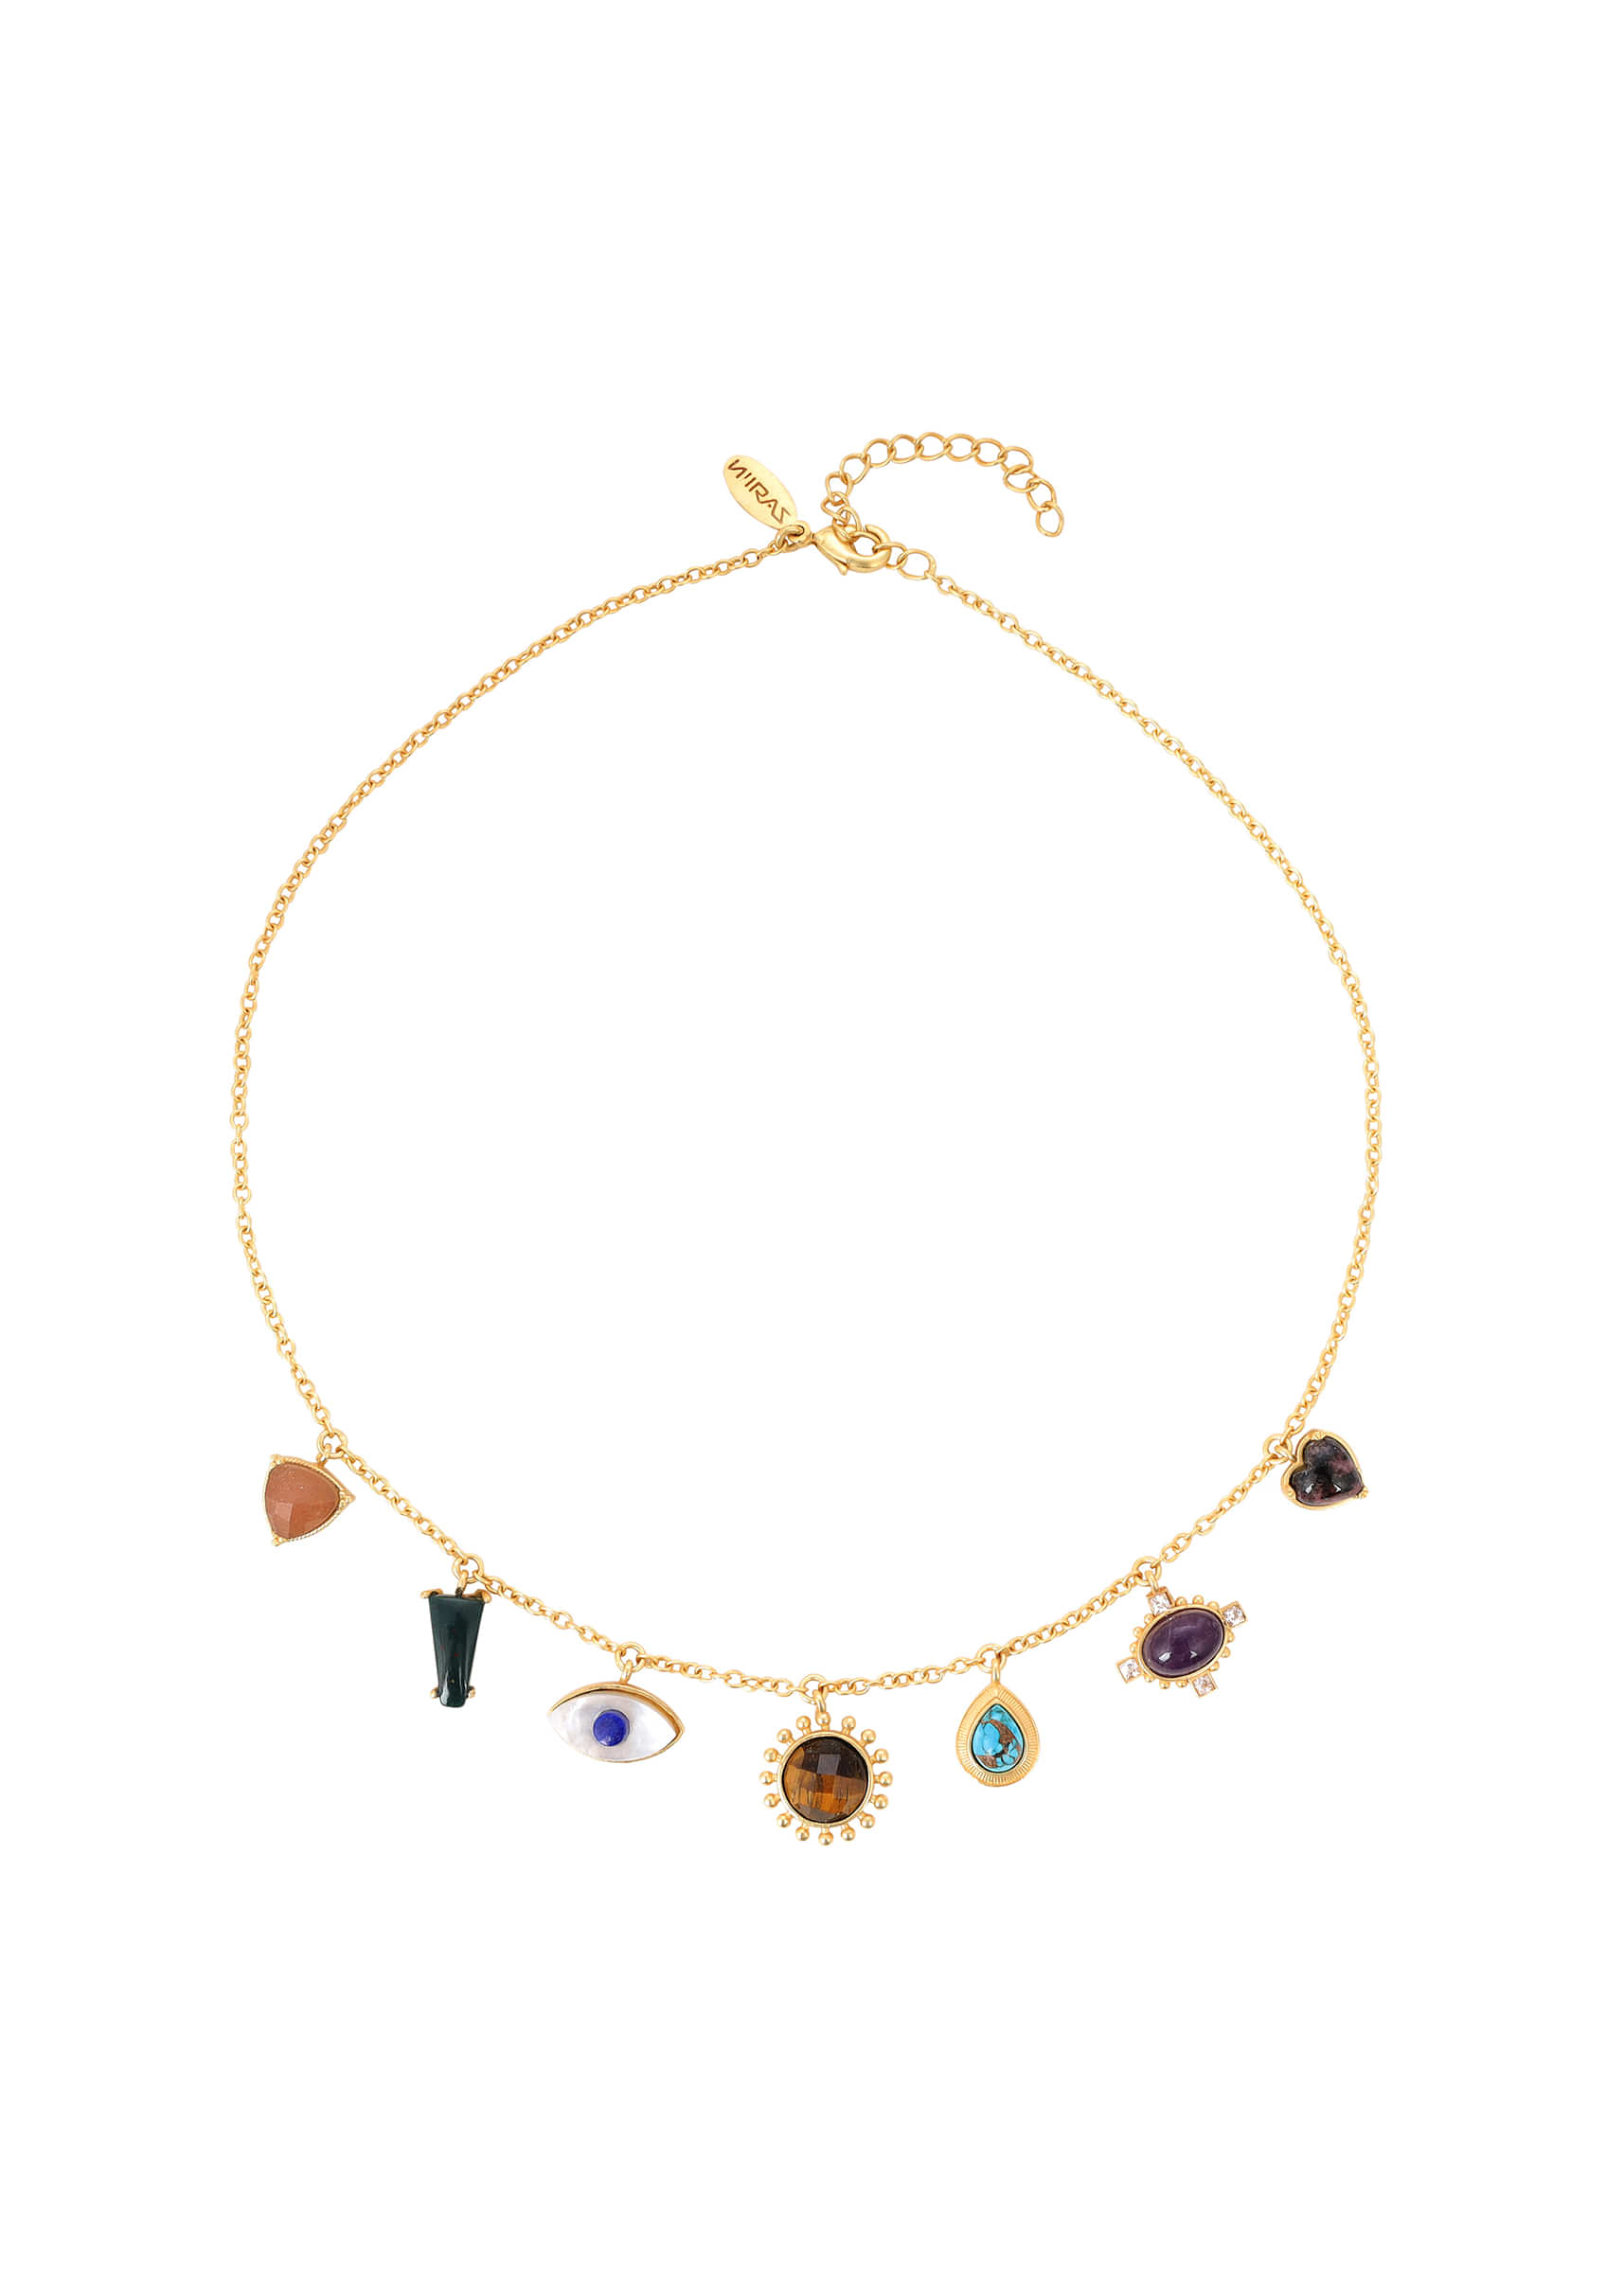 22Kt Gold Plated Multi Colored Healing Stone Link Necklace